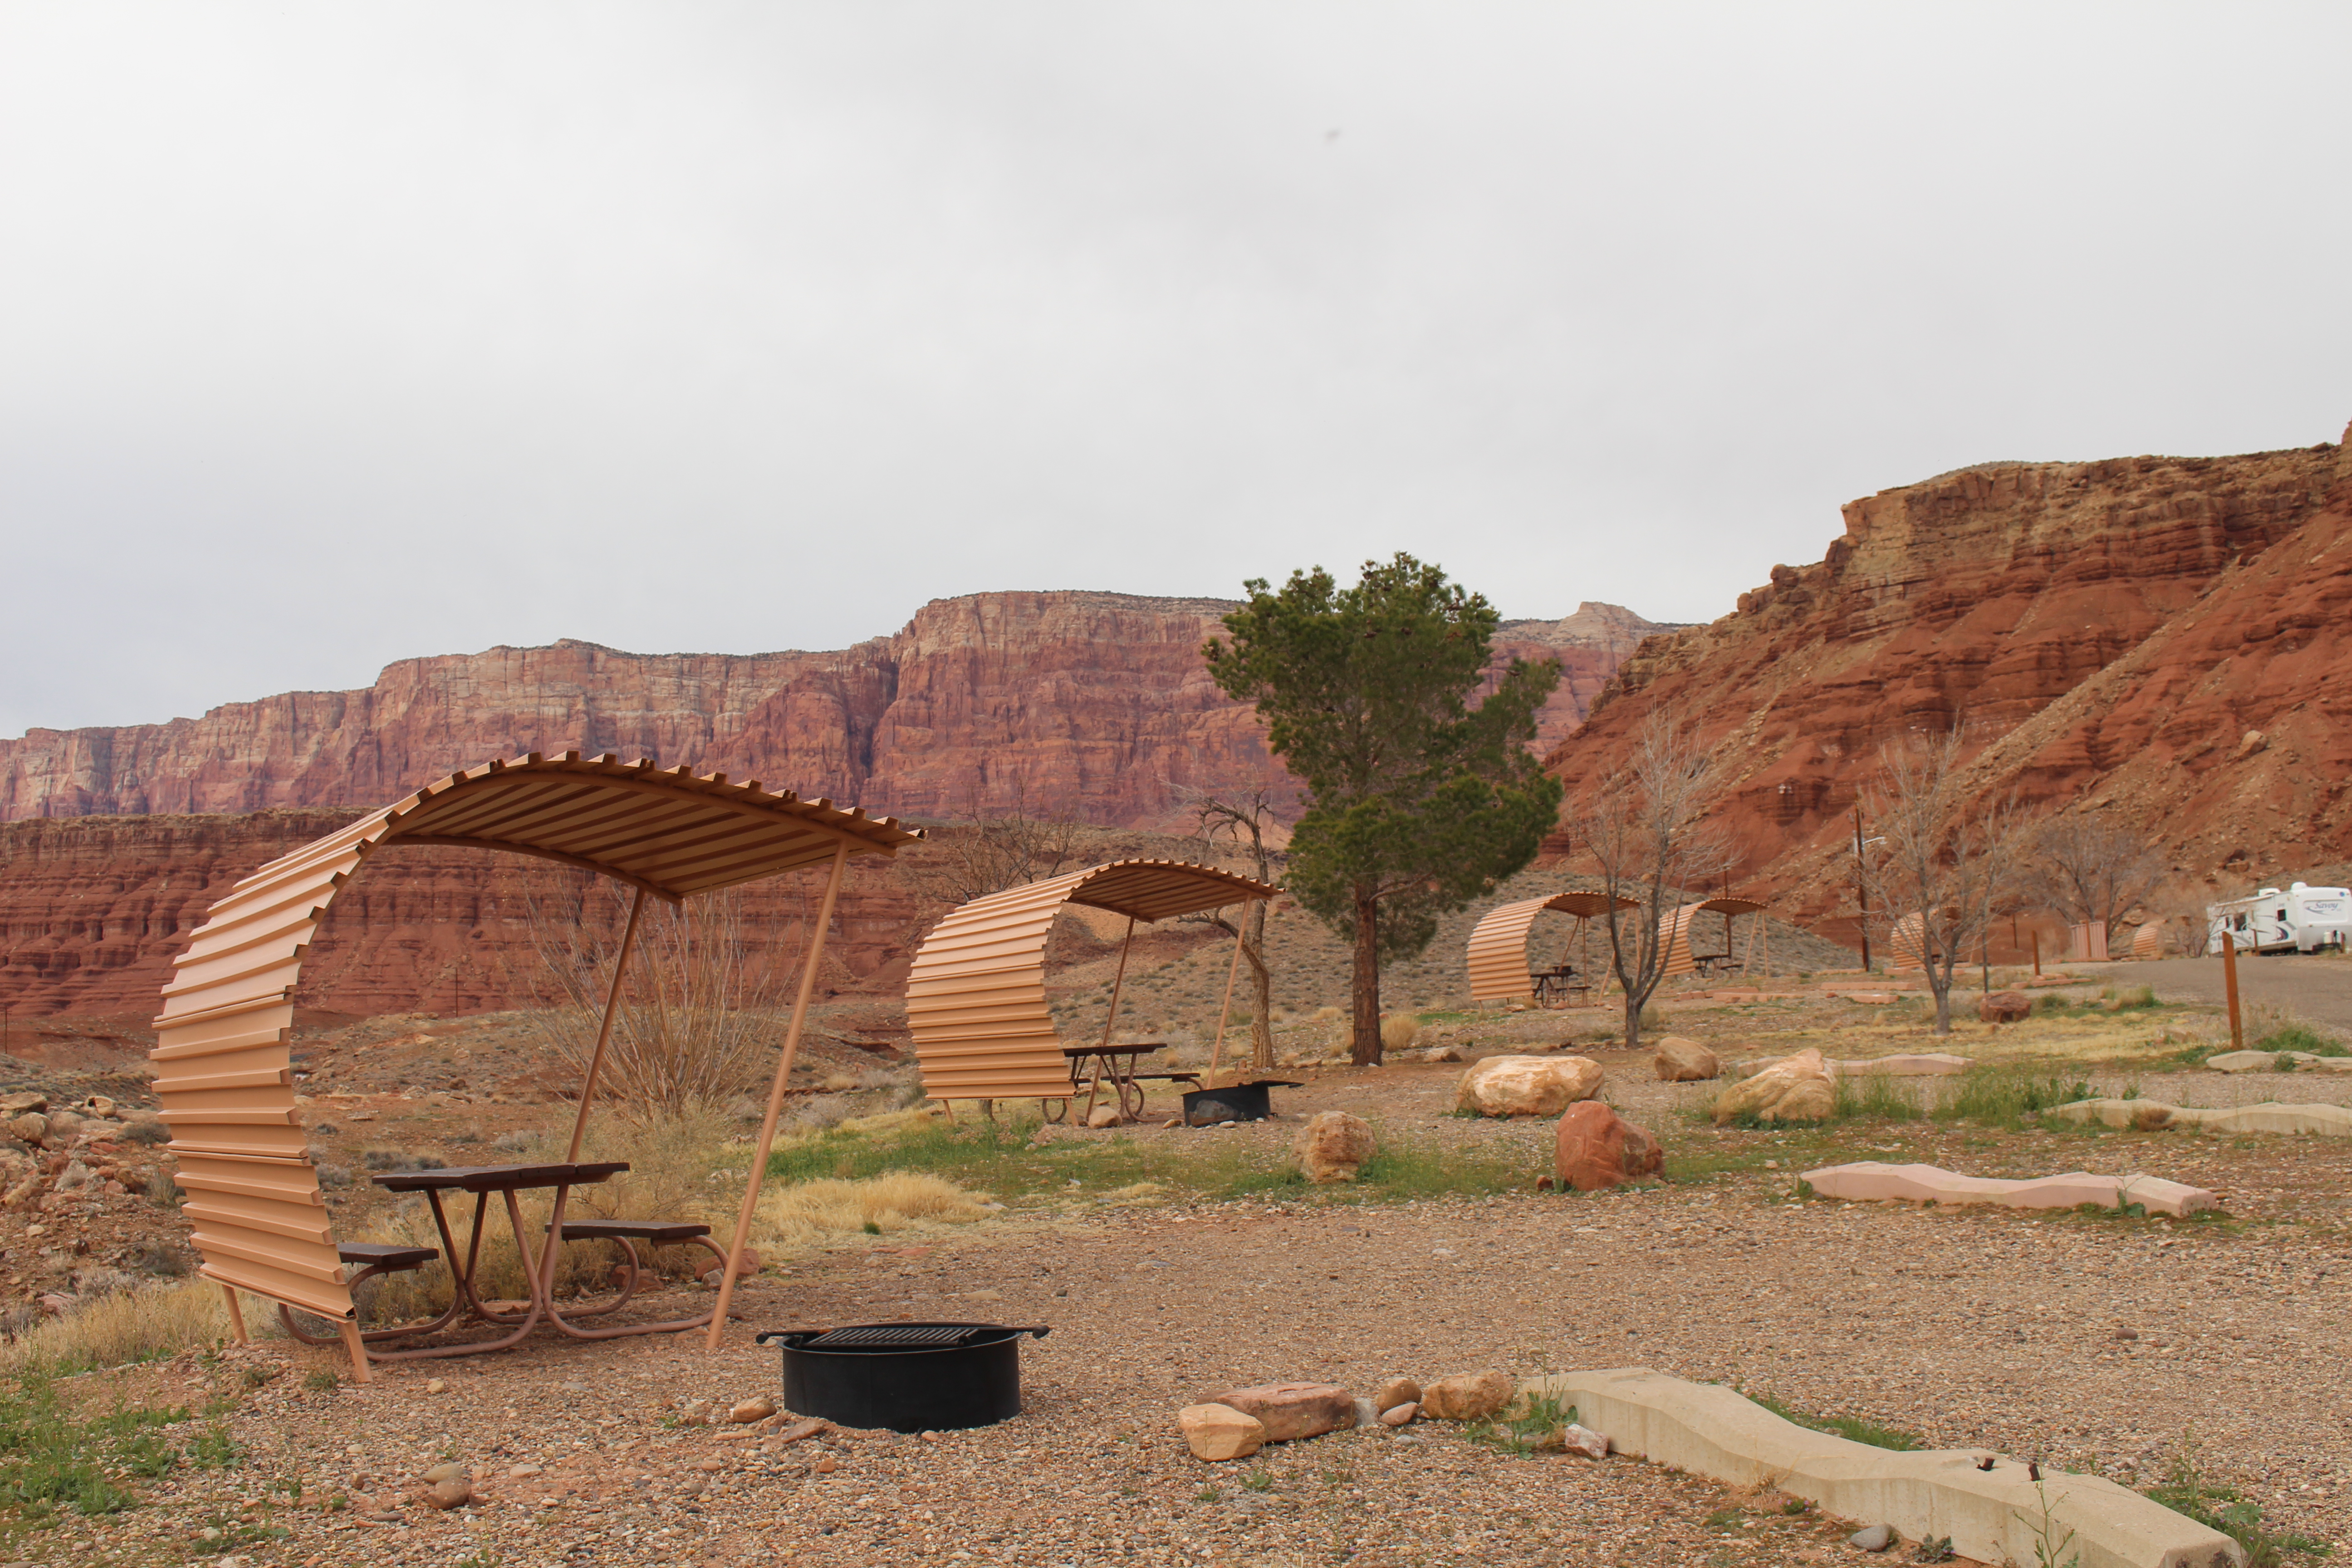 Rows of campsites with shade shelters and campfire rings